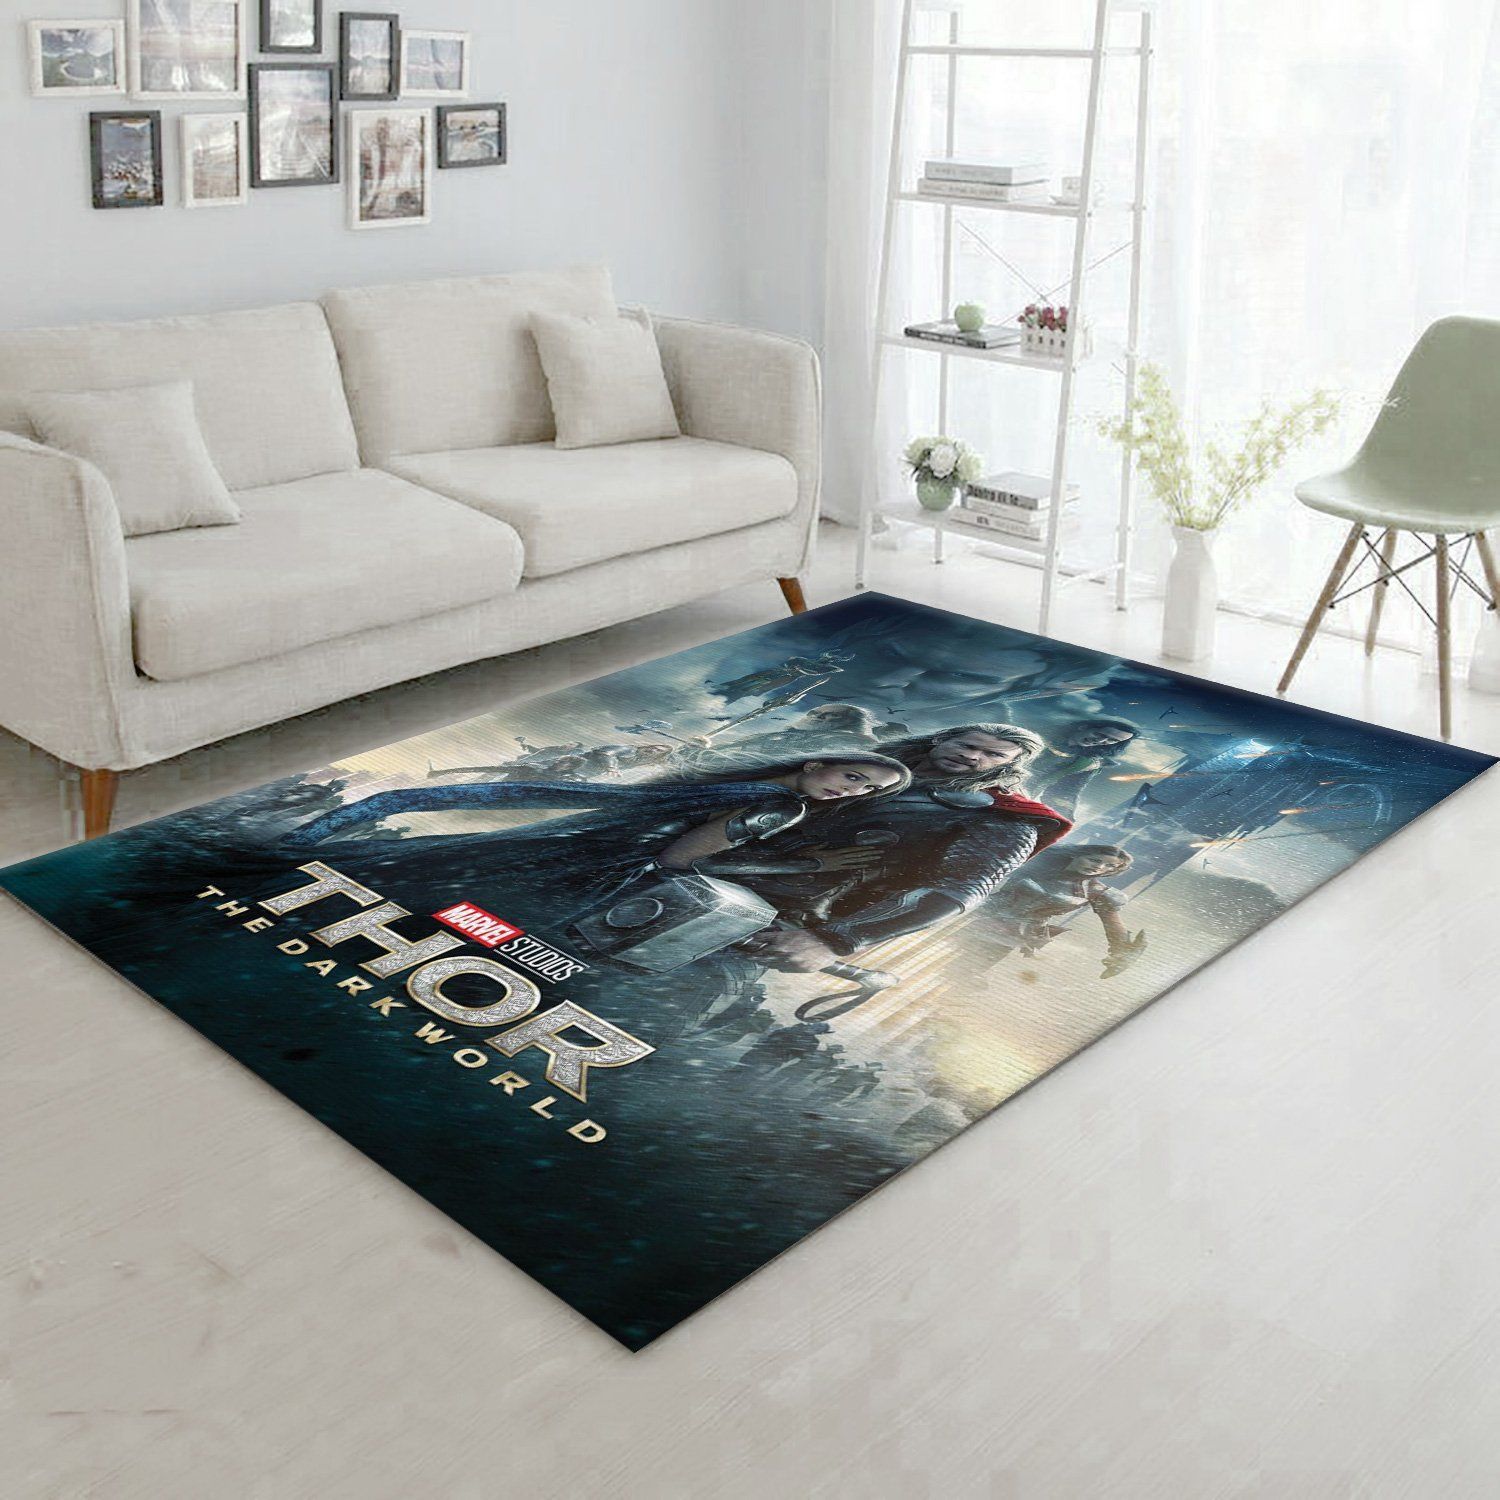 Thor The Dark World Movie Area Rug For Christmas, Kitchen Rug, Home Decor Floor Decor - Indoor Outdoor Rugs 2